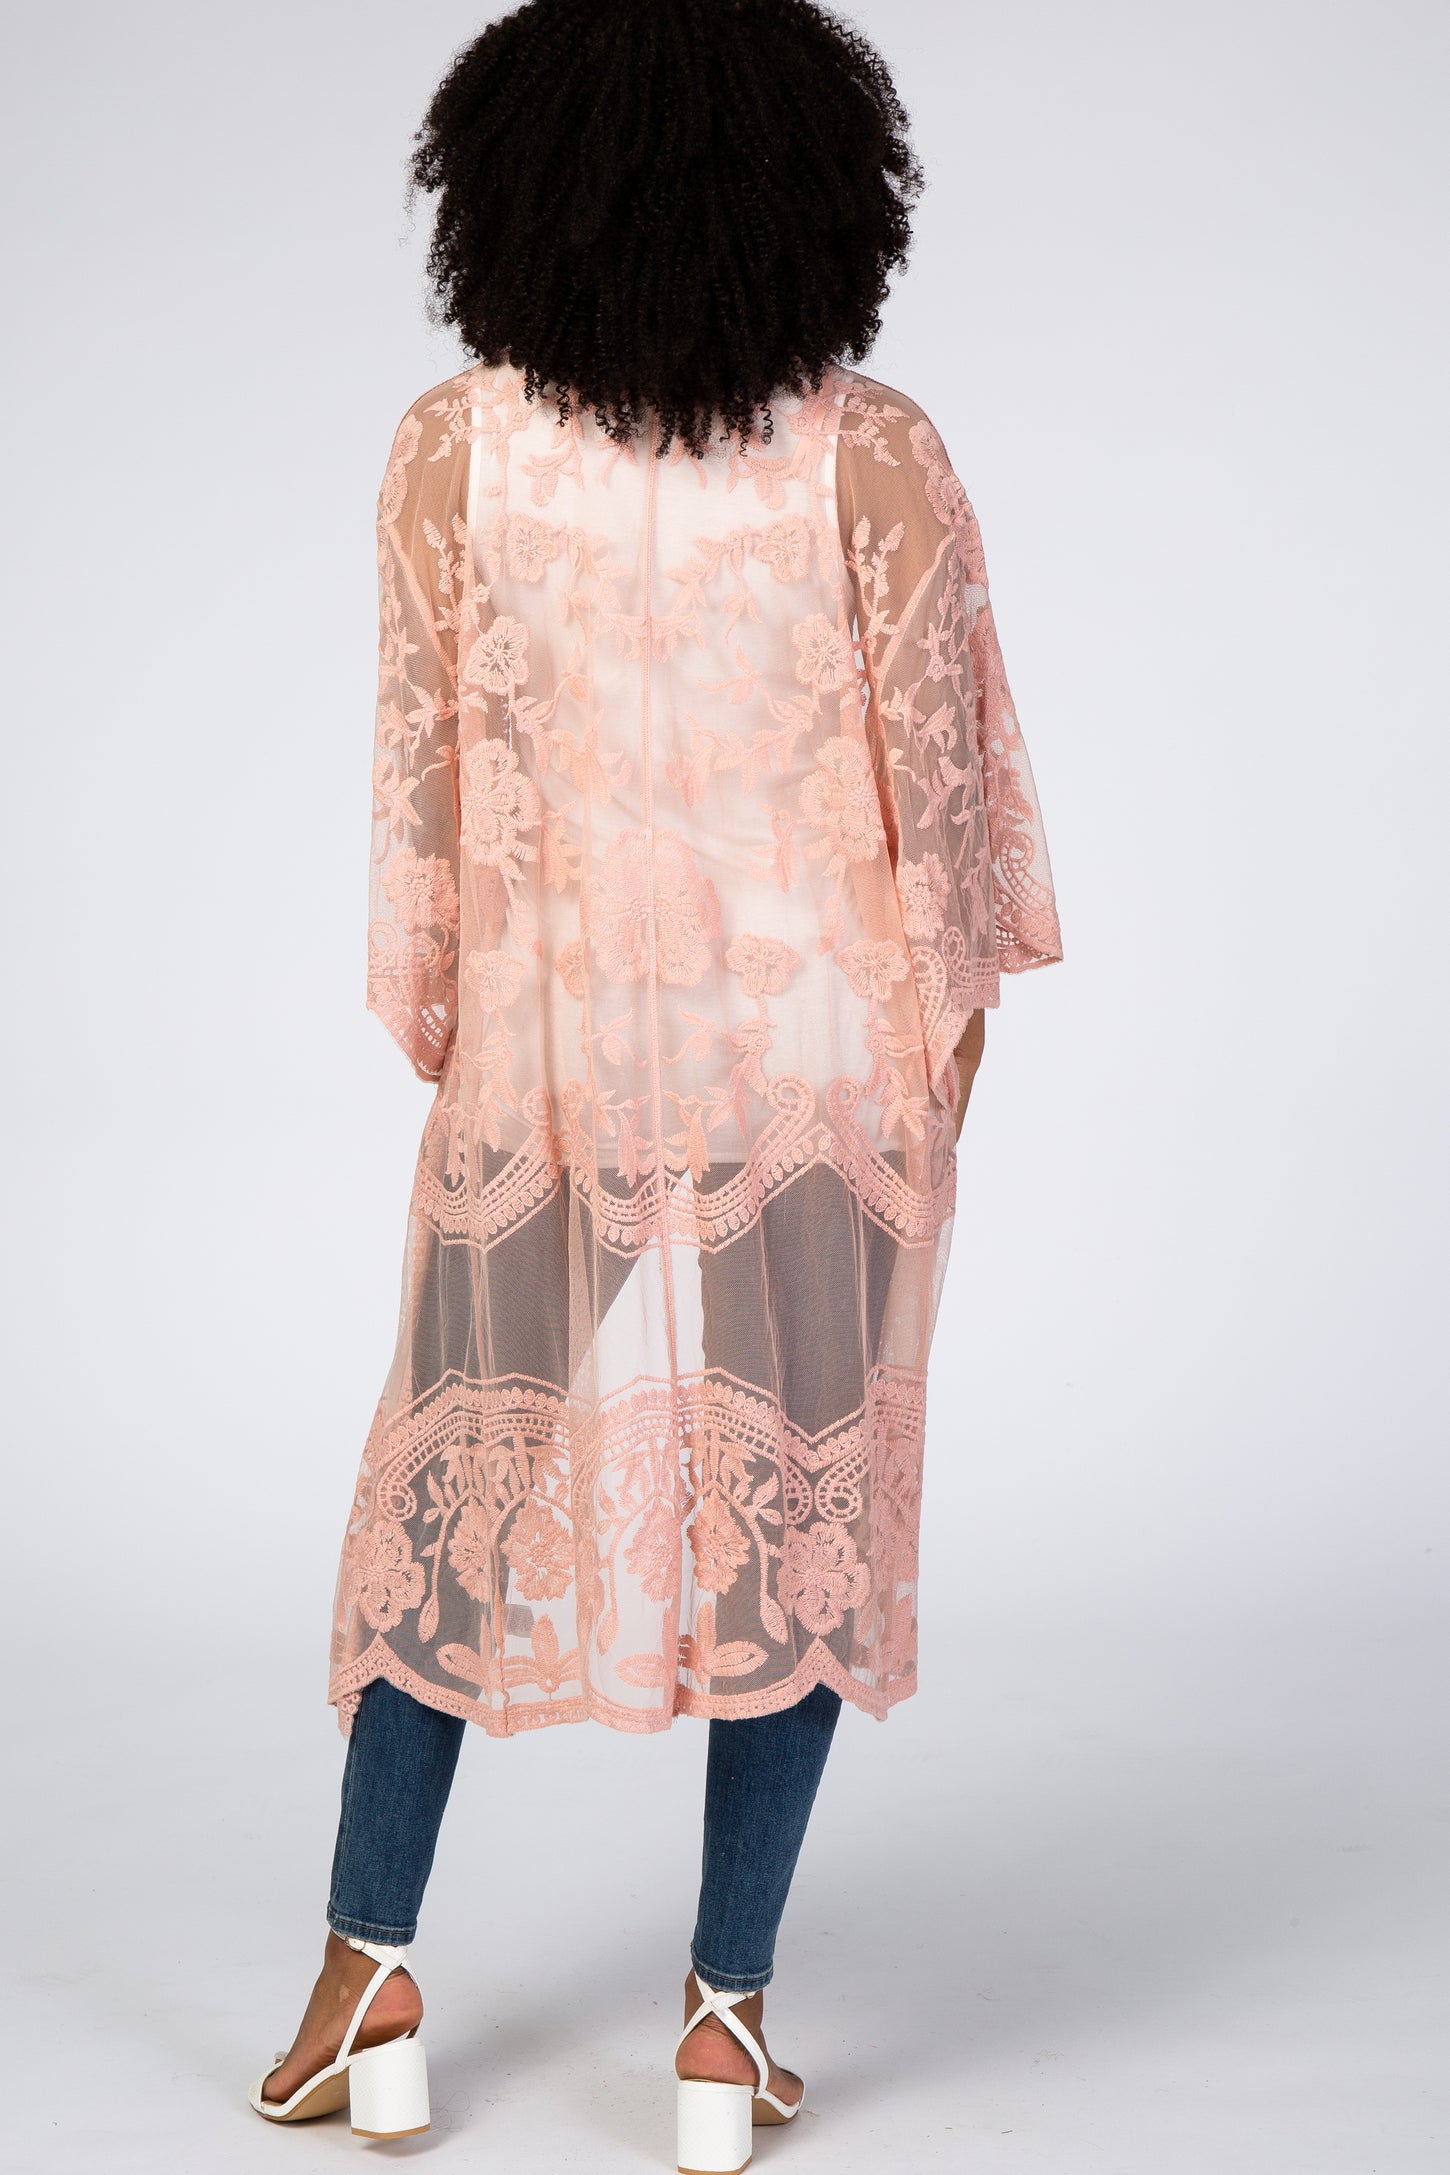 Light Pink Mesh Lace Cover Up